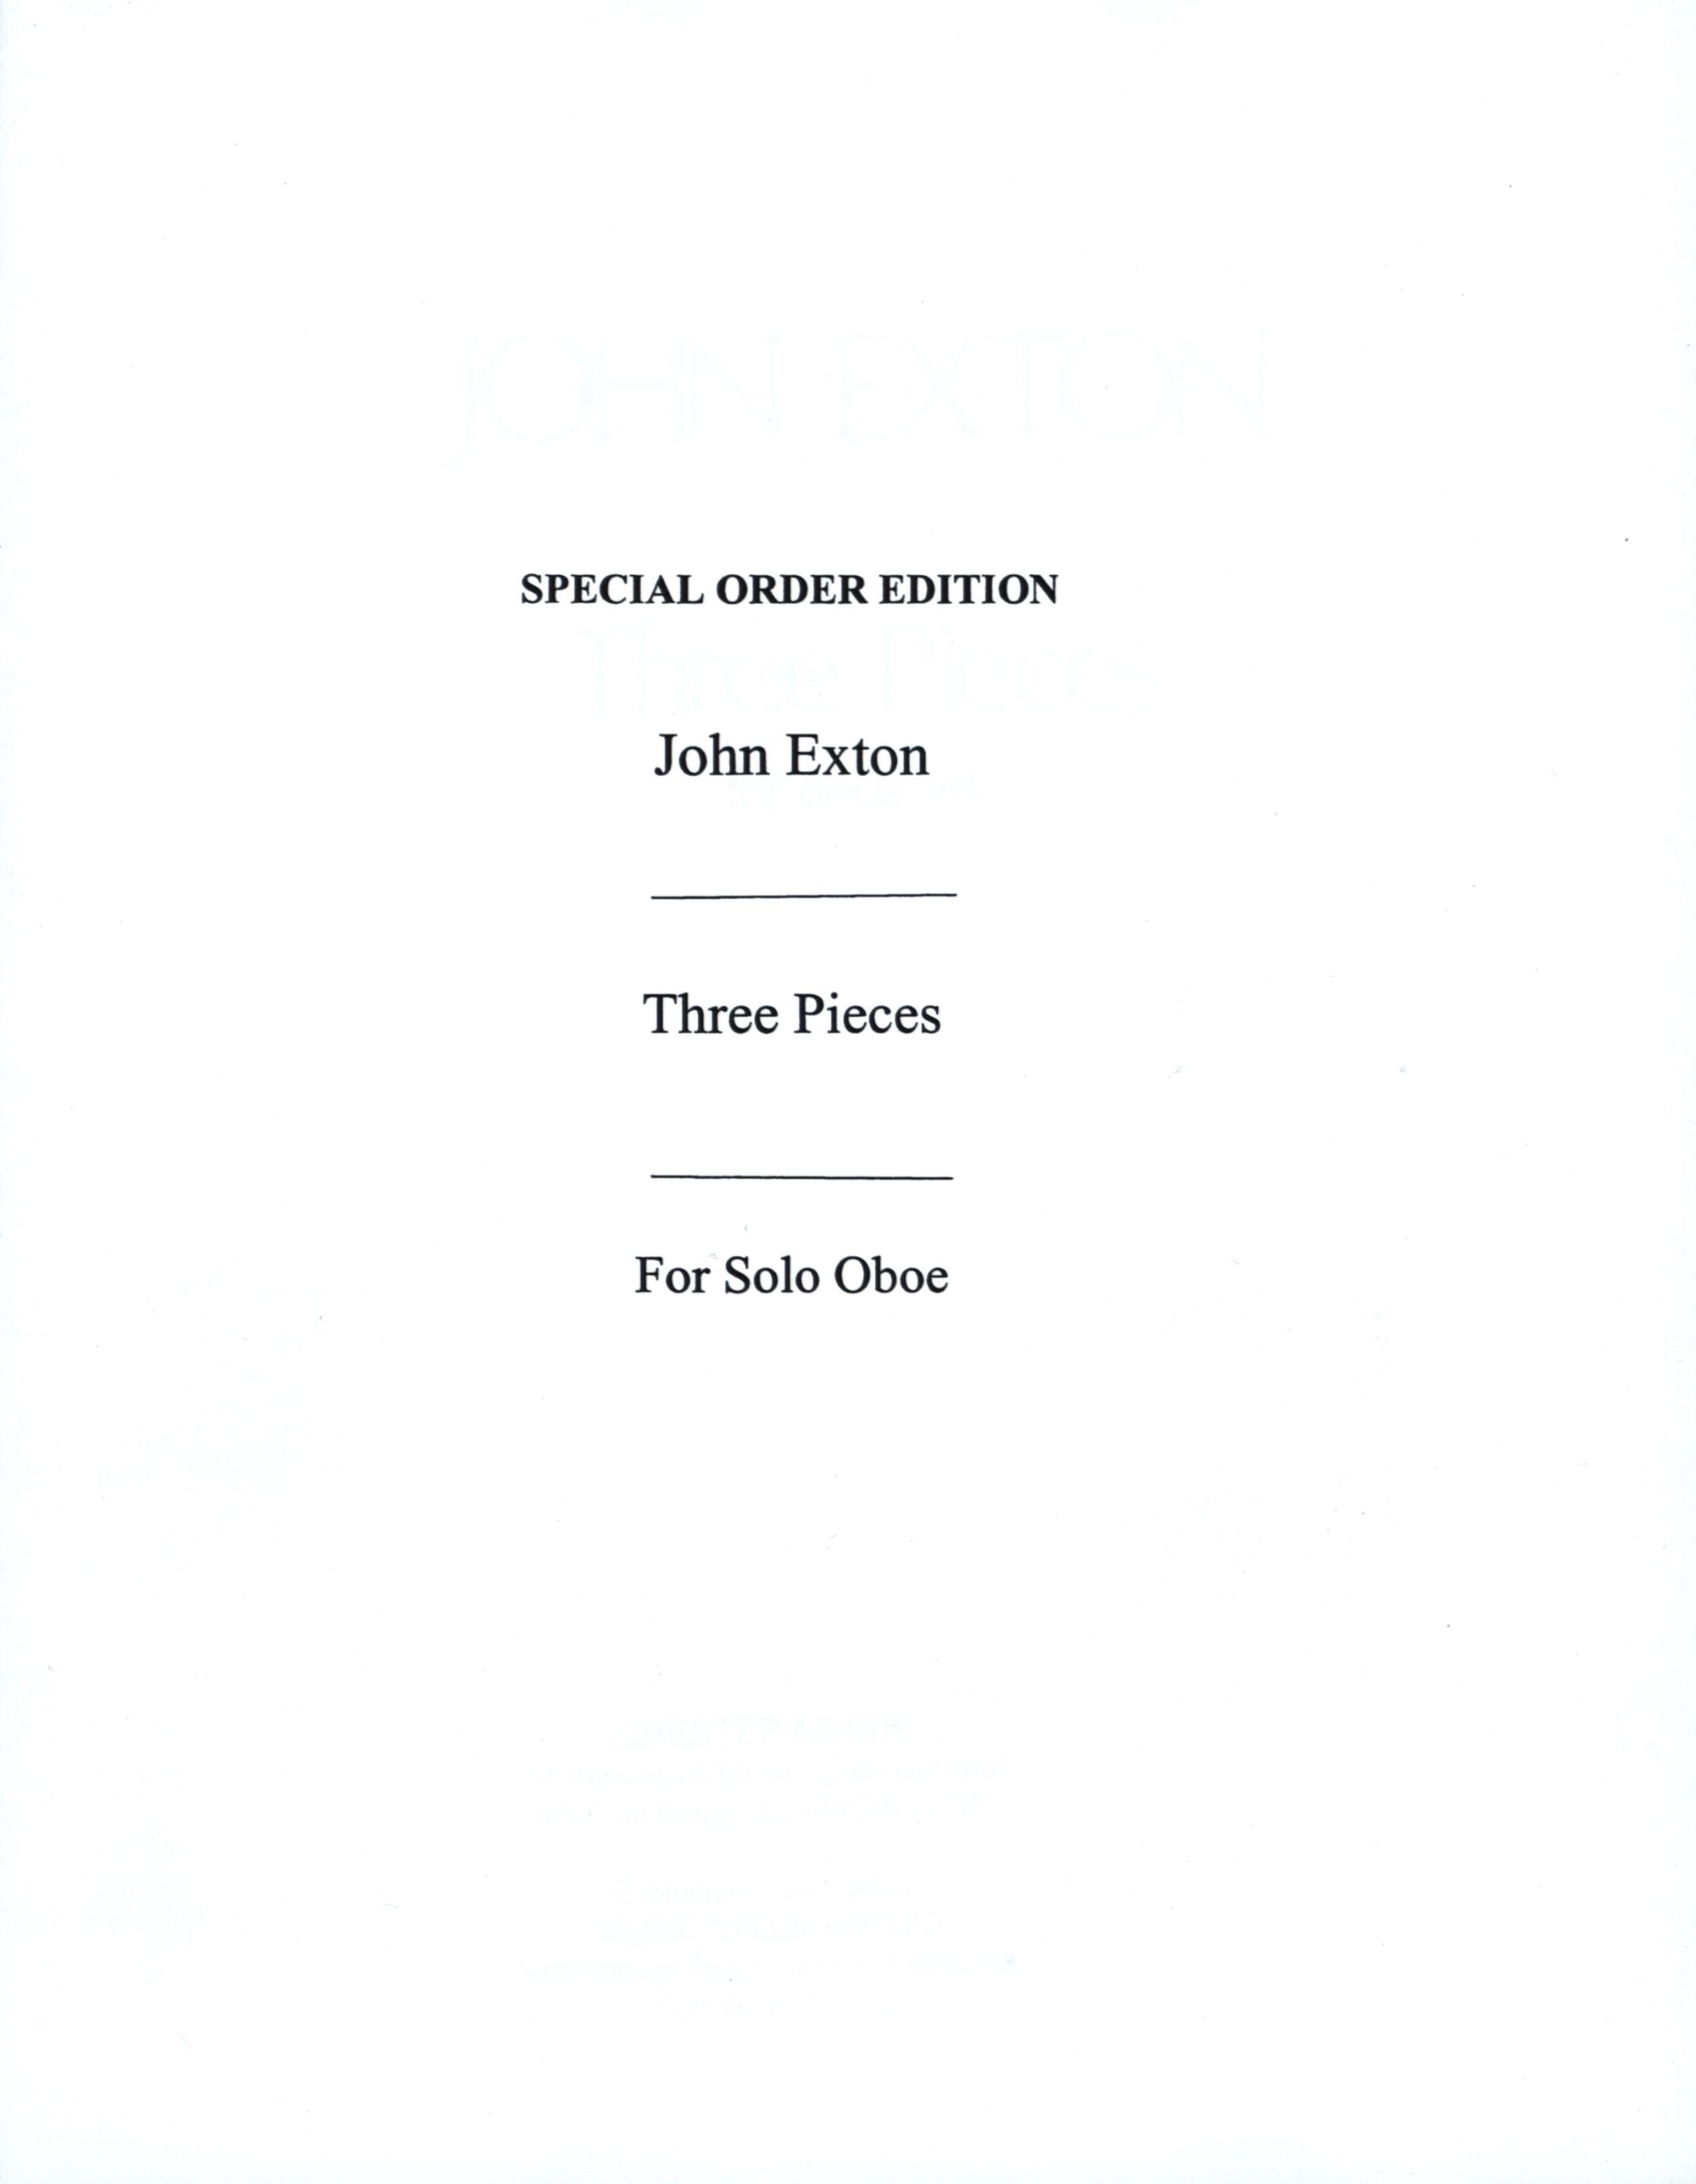 Exton: 3 Pieces for Solo Oboe